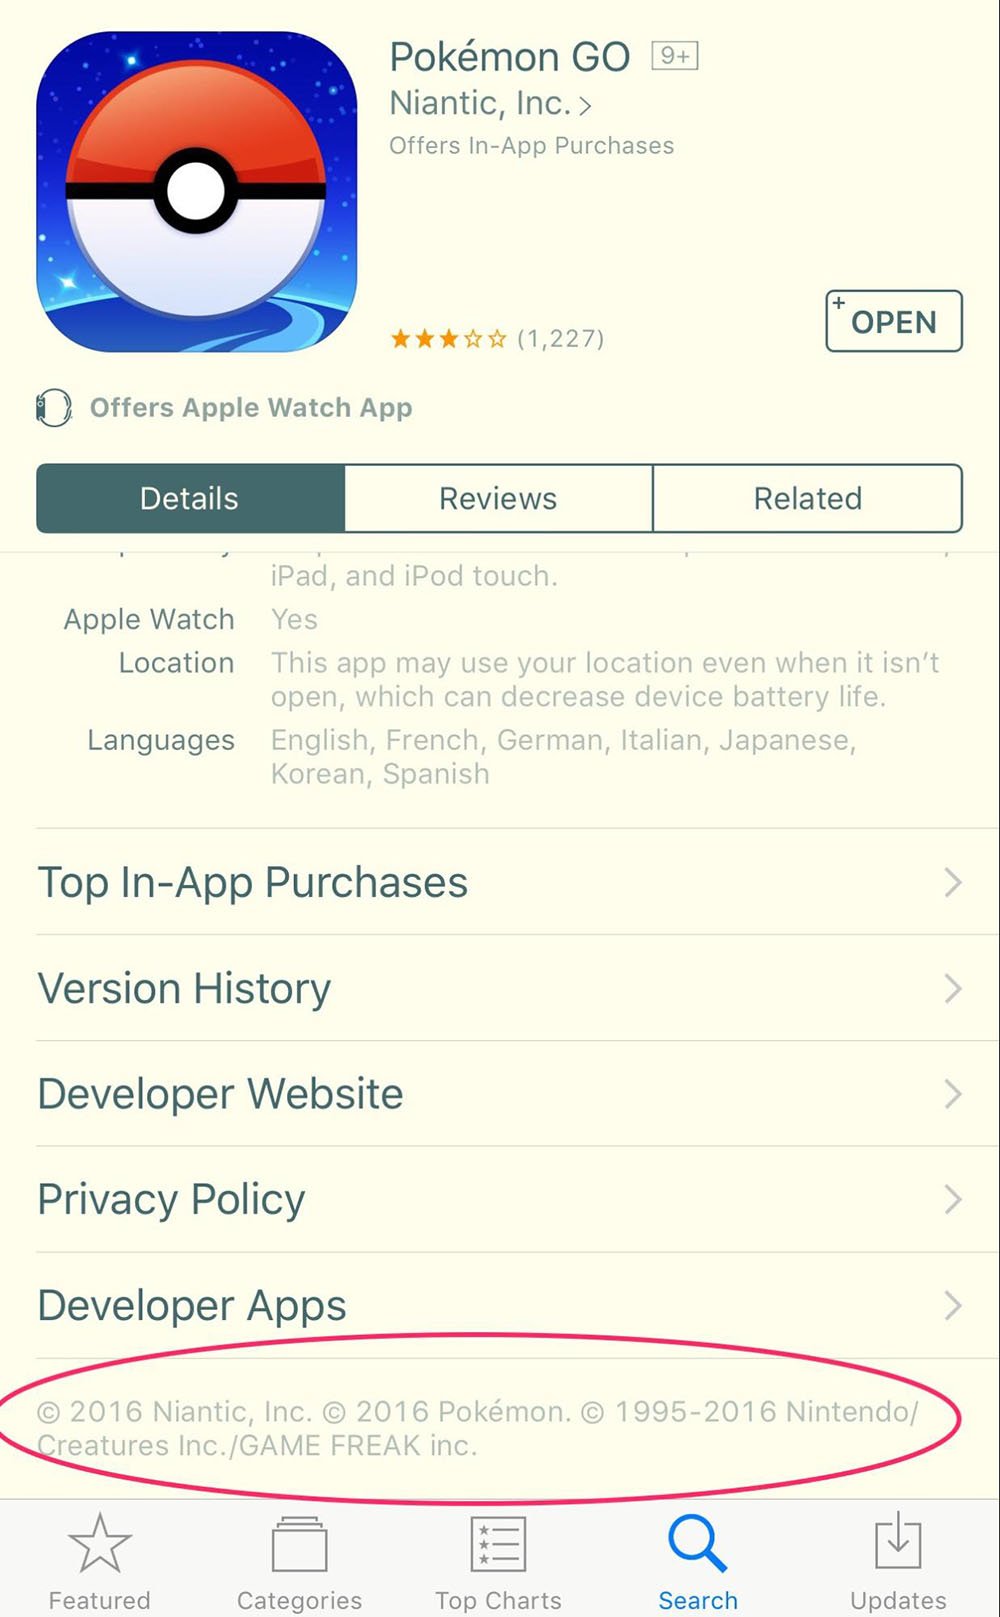 Pokemon GO mobile game on App Store: Copyright notice on profile page